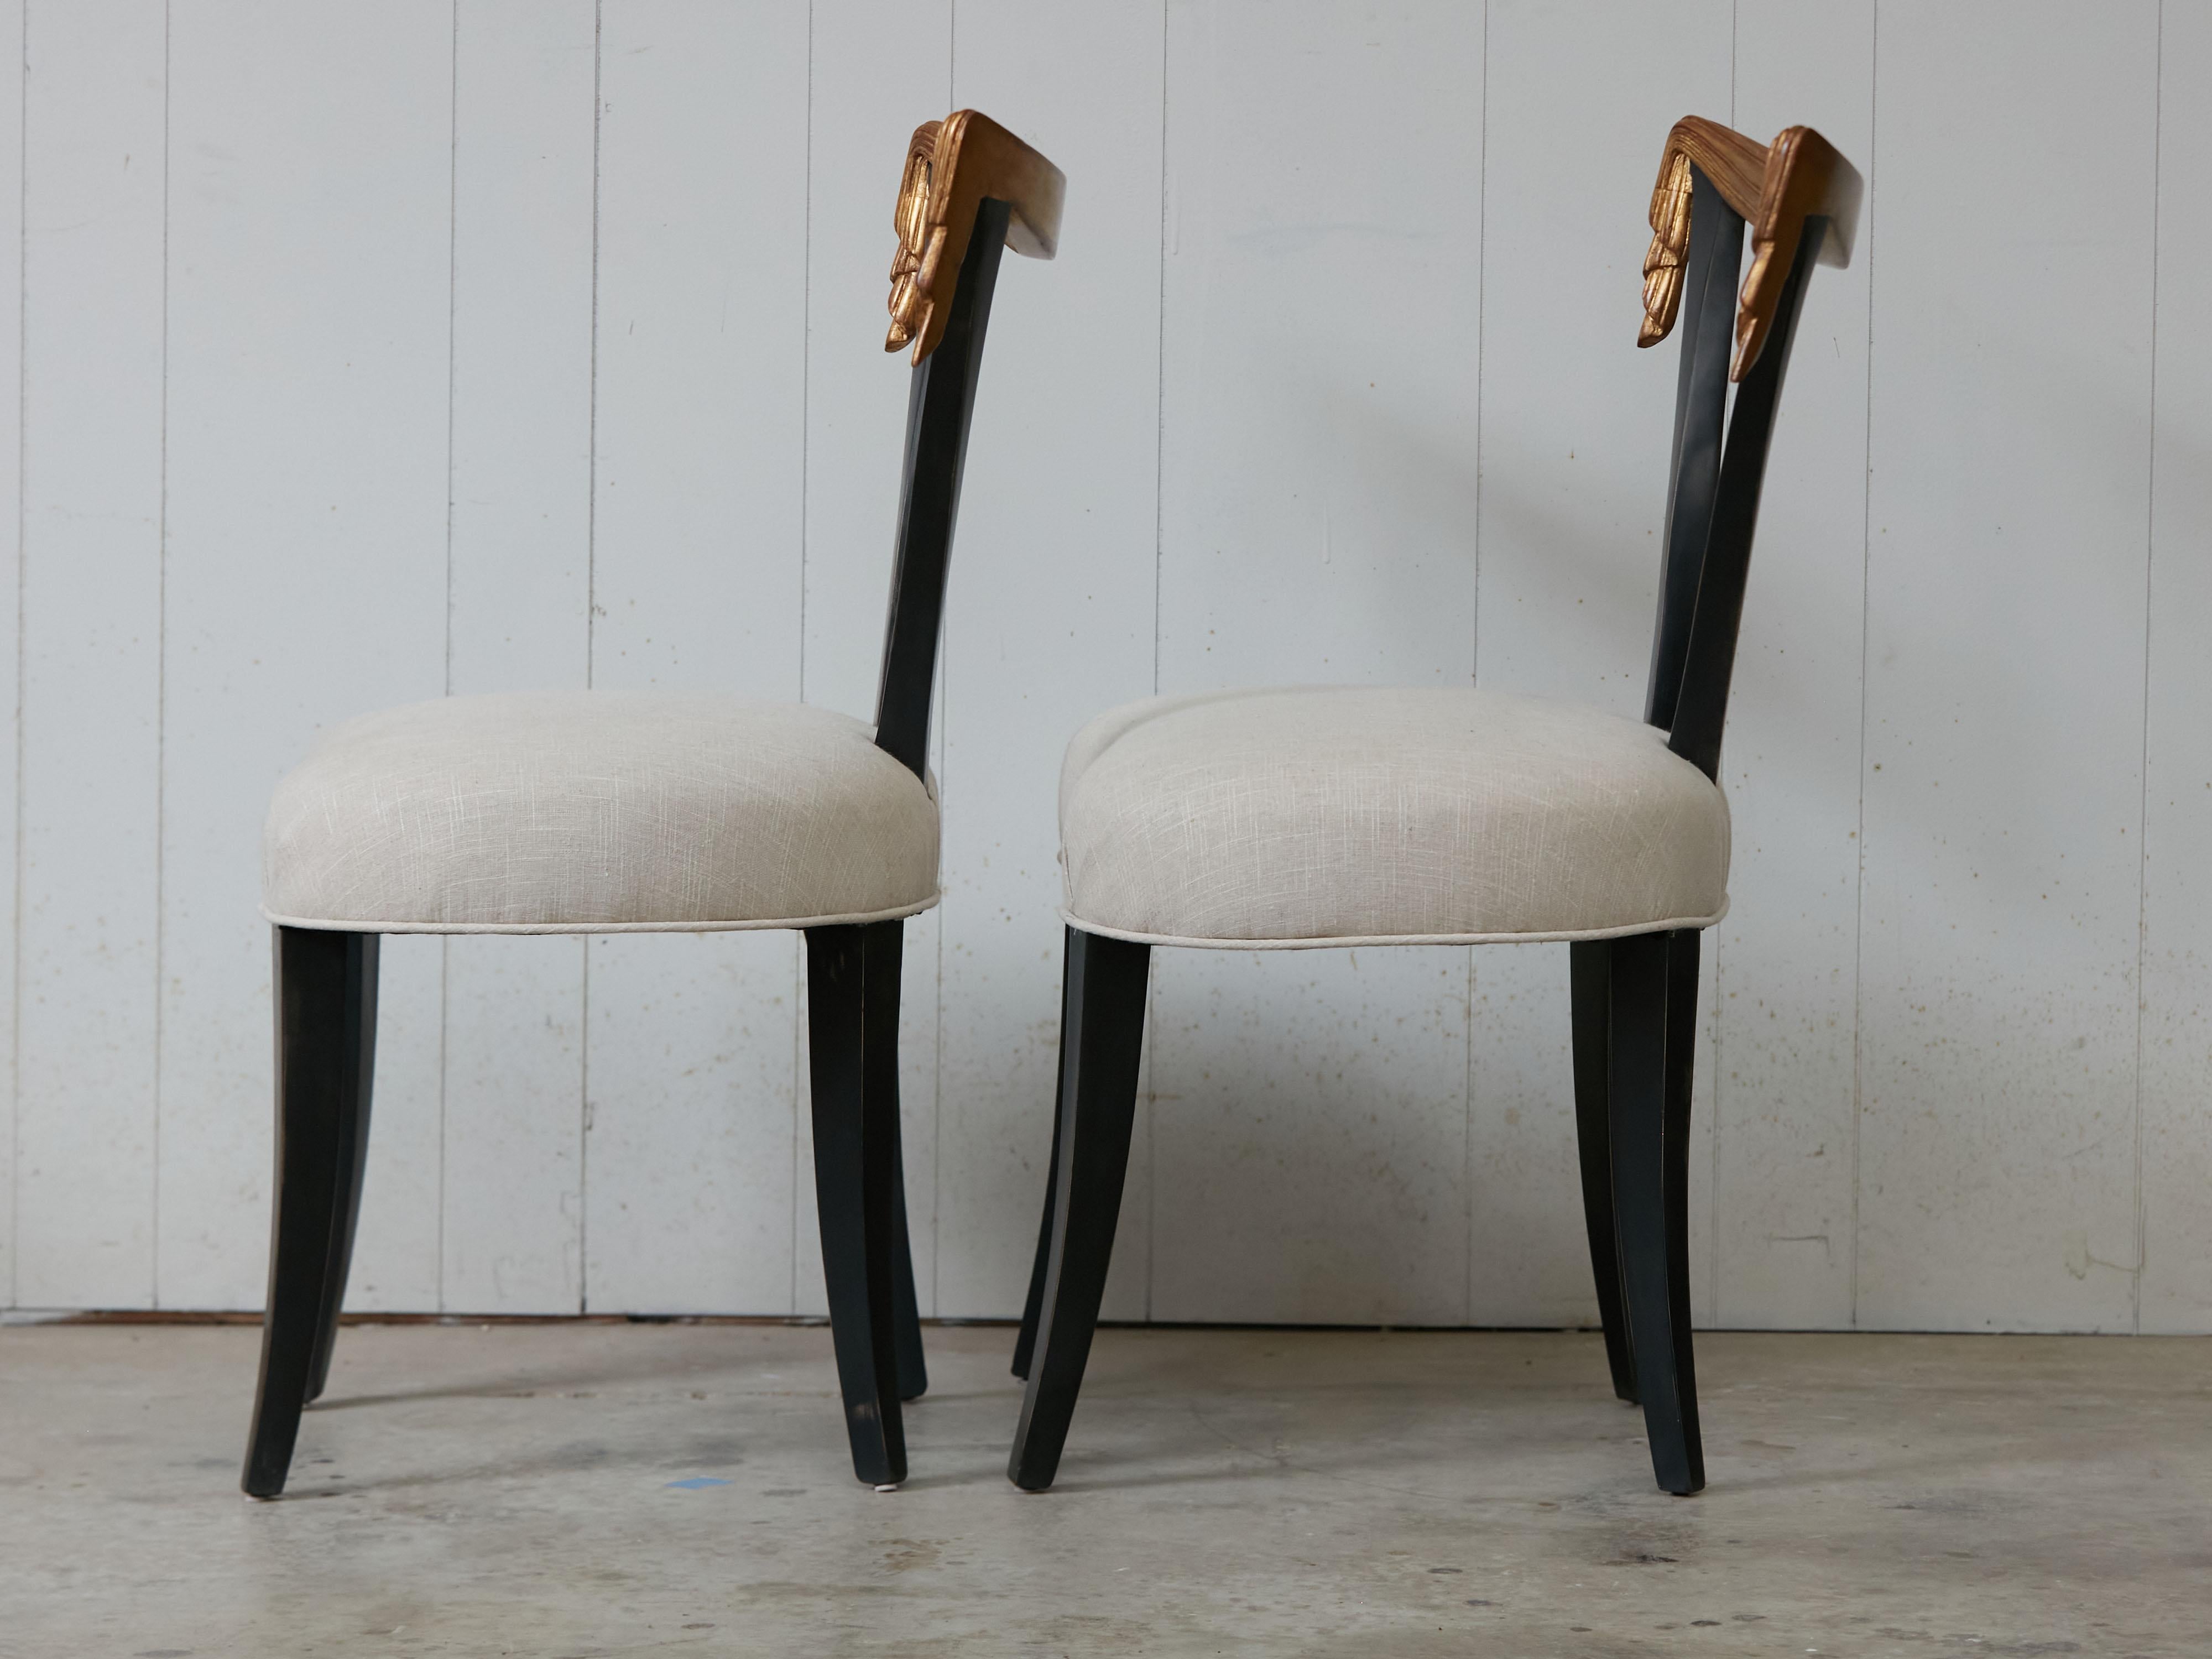 Pair of Midcentury Dorothy Draper Style Hollywood Regency Black and Gold Chairs For Sale 4